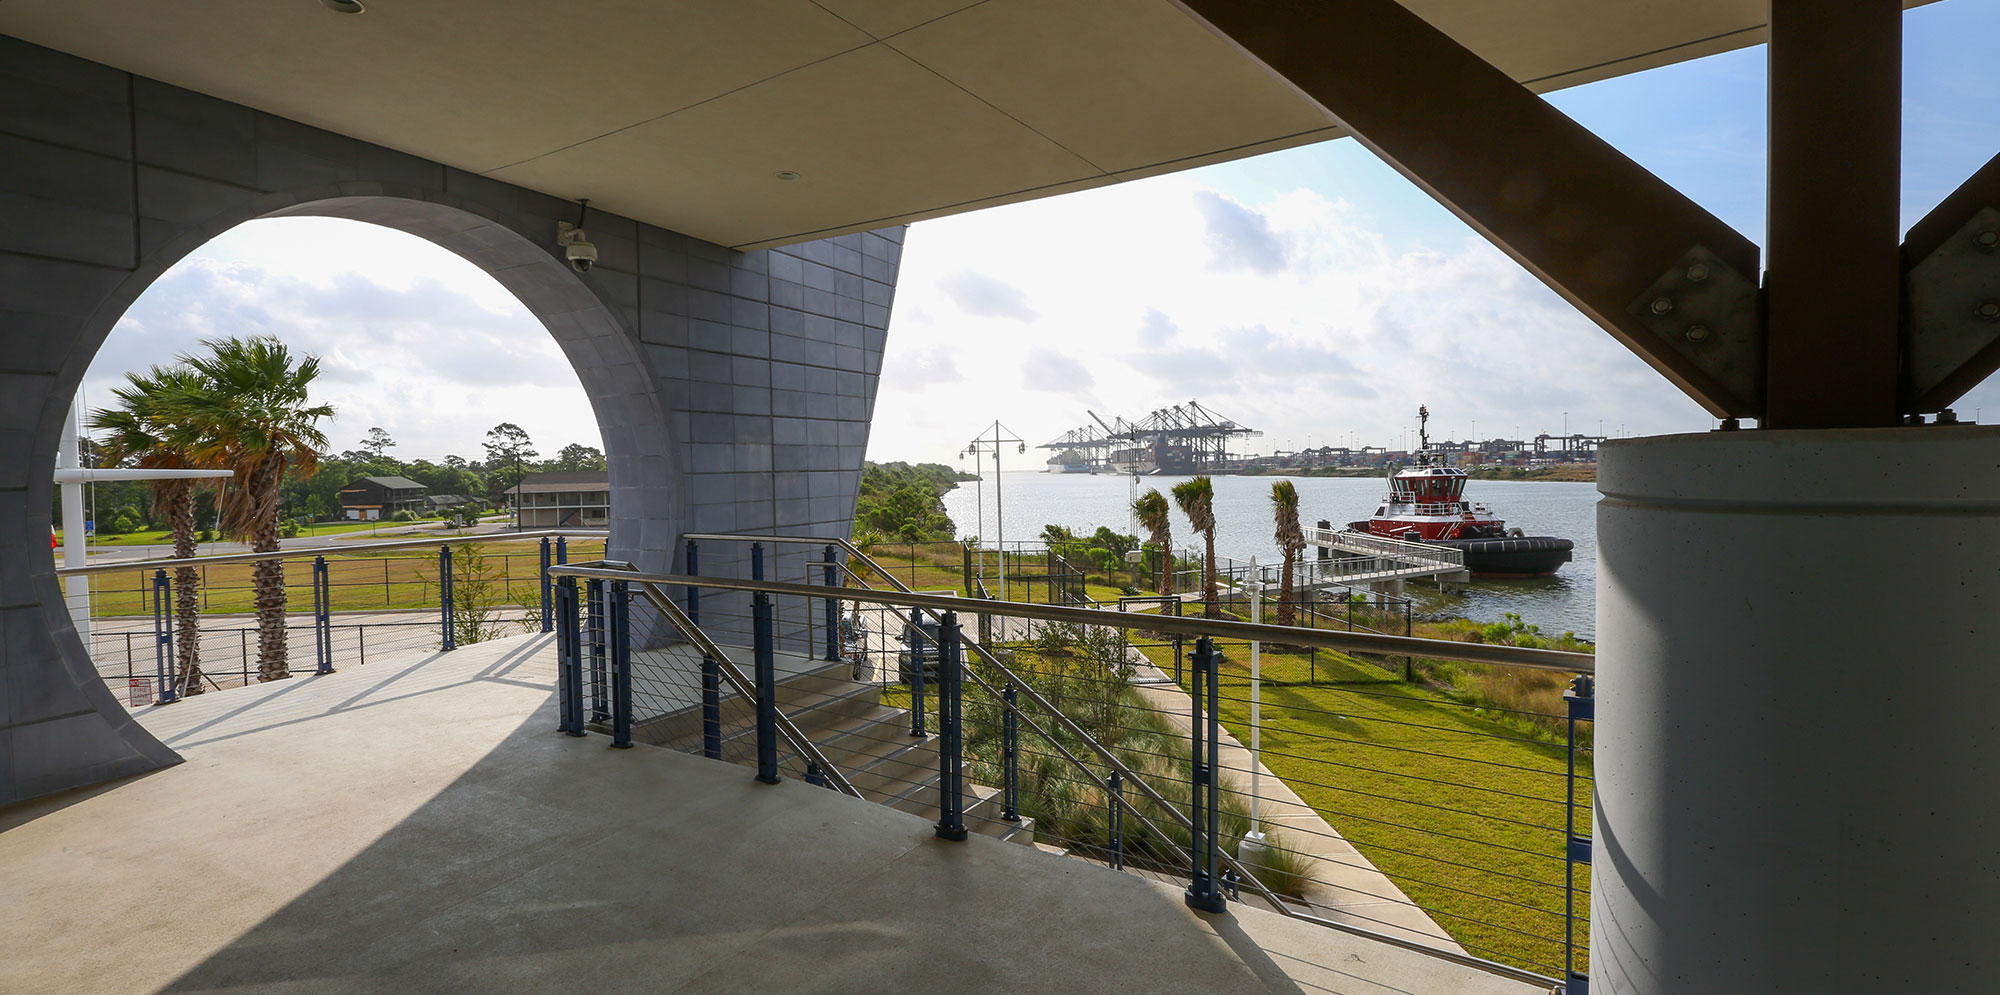 Balcony of Maritime Technology Training Center, looking at water